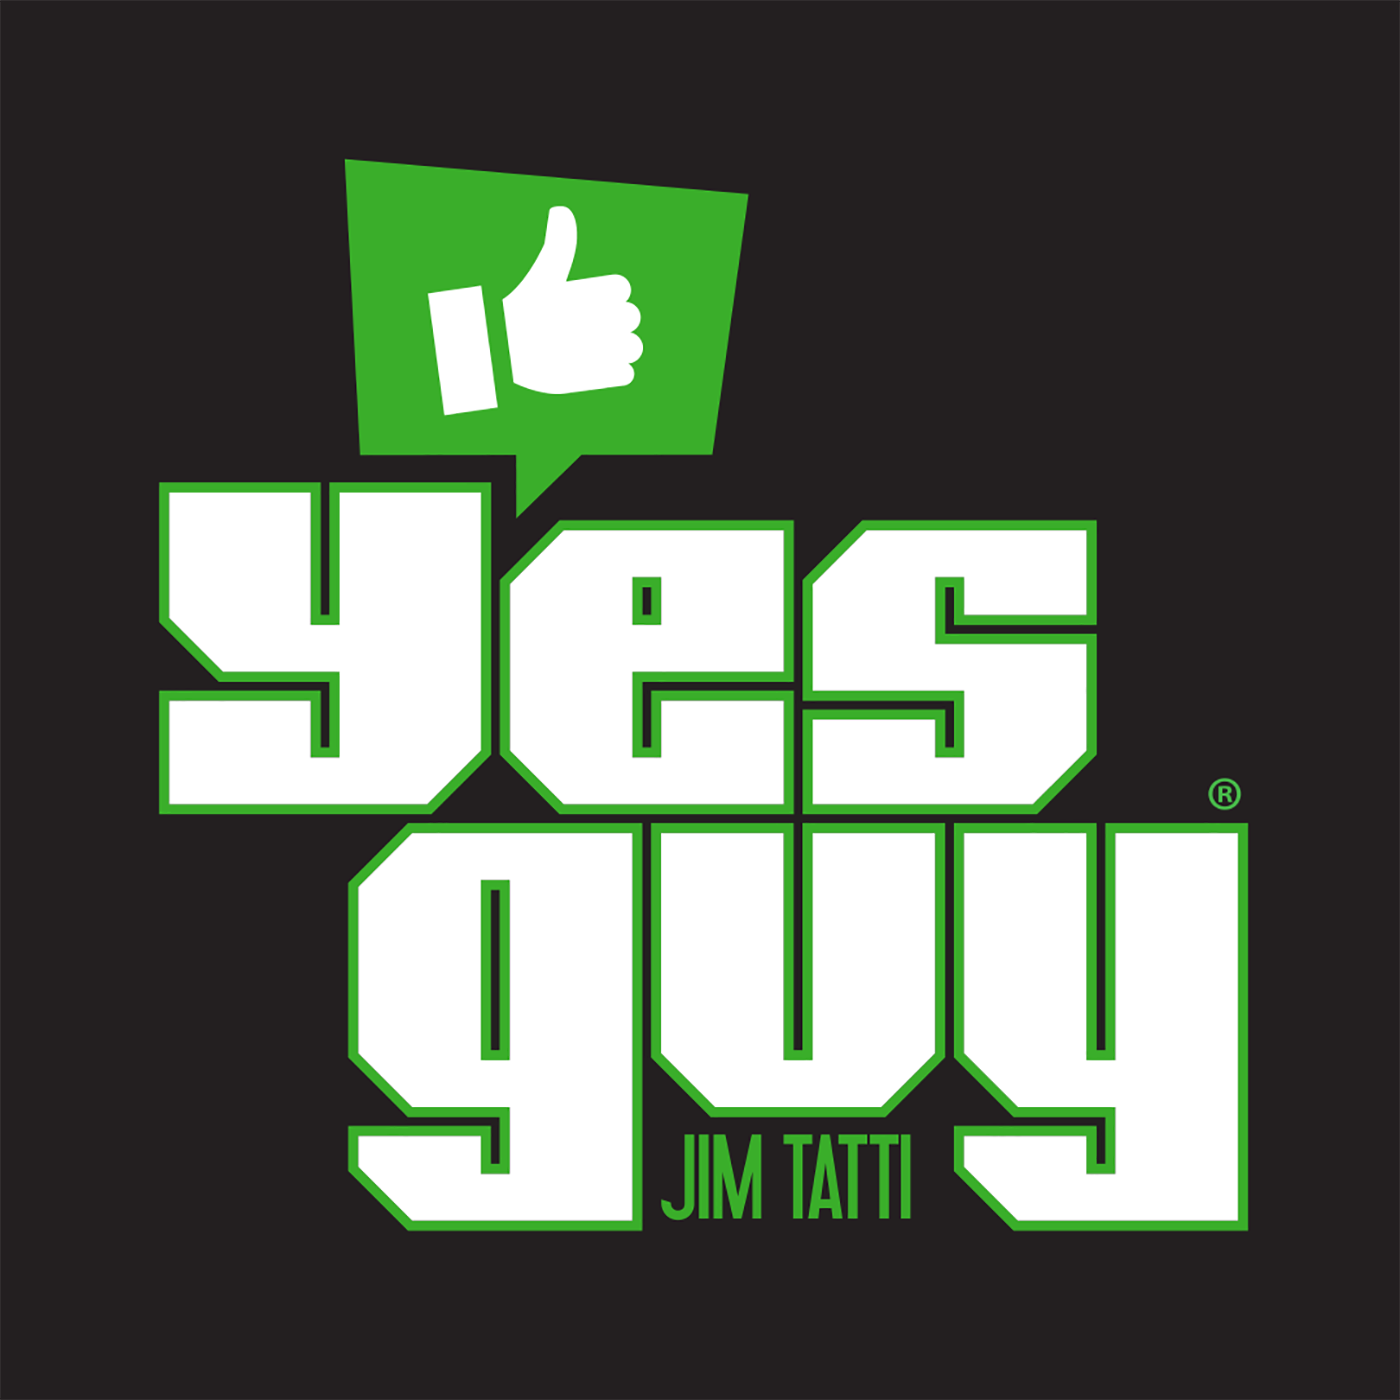 Yes Guy - March 15 - Episode 188